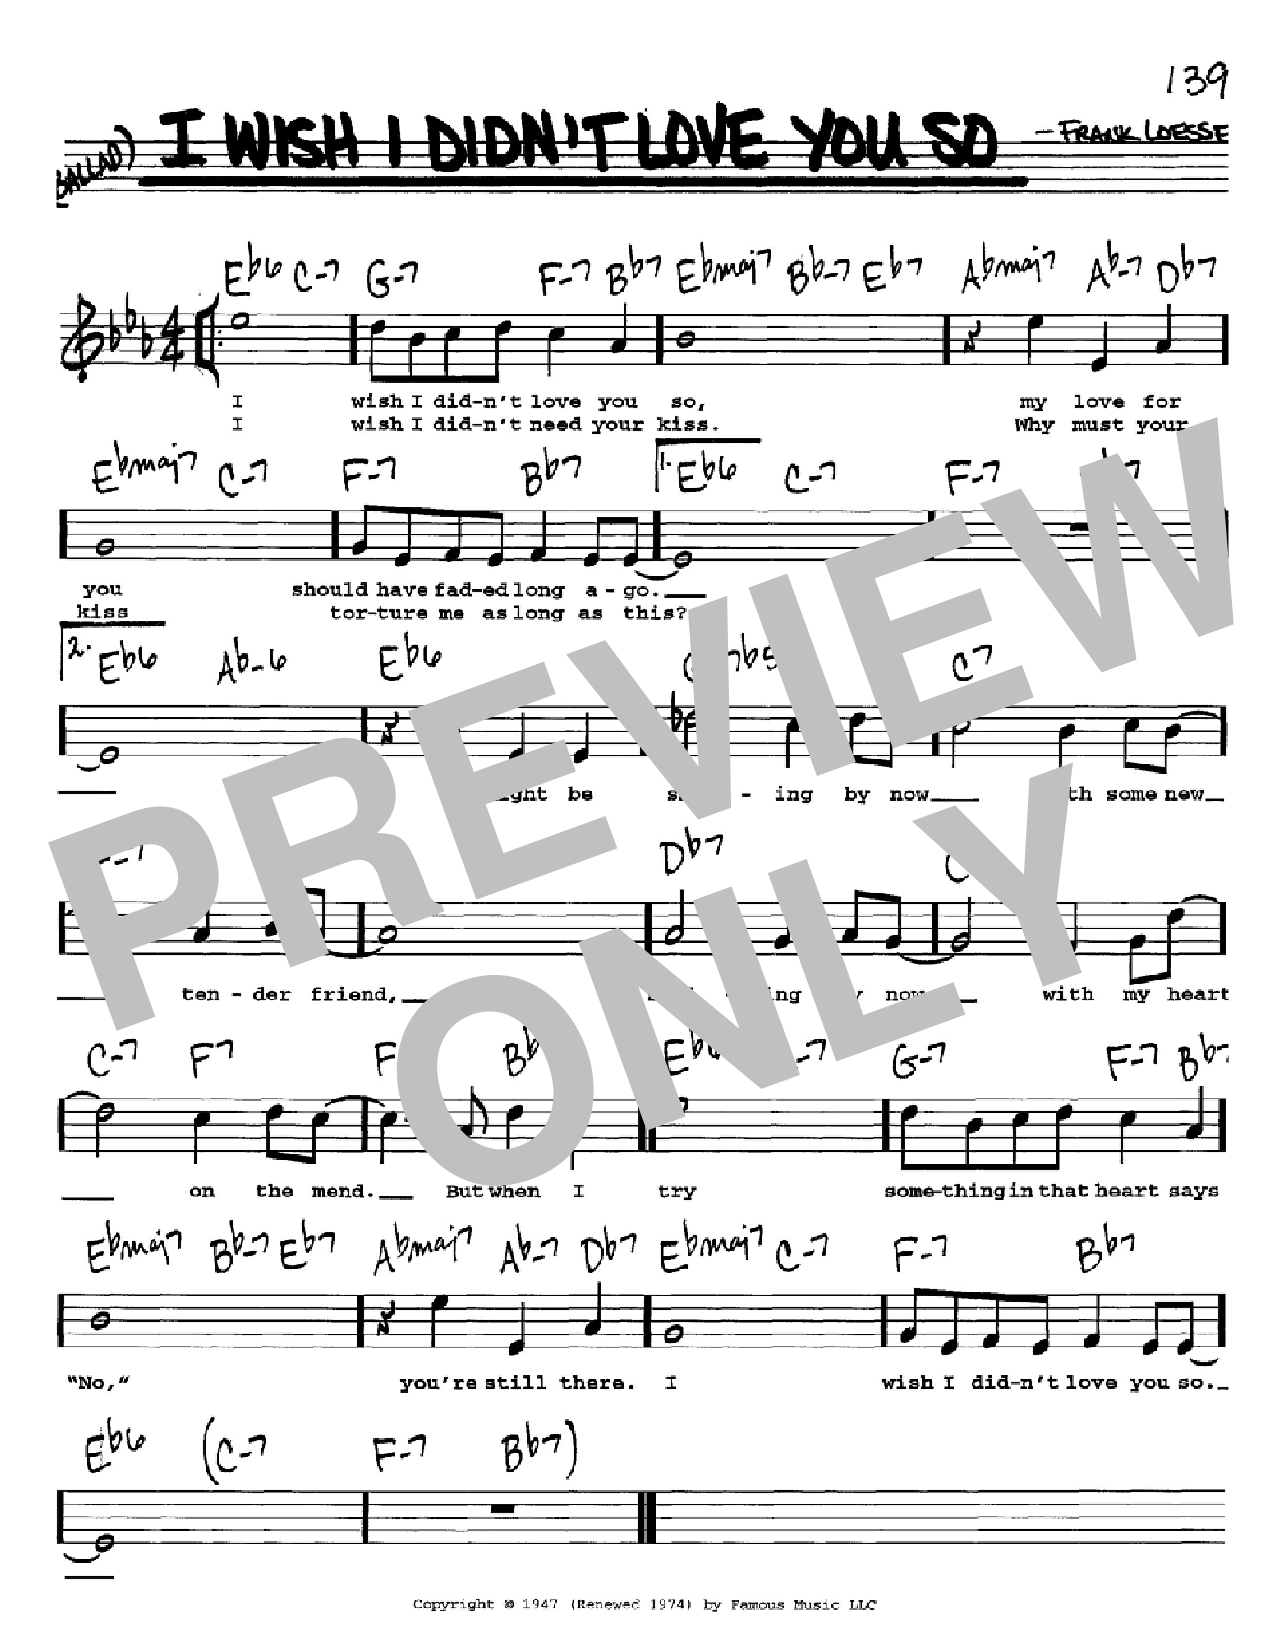 Download Frank Loesser I Wish I Didn't Love You So Sheet Music